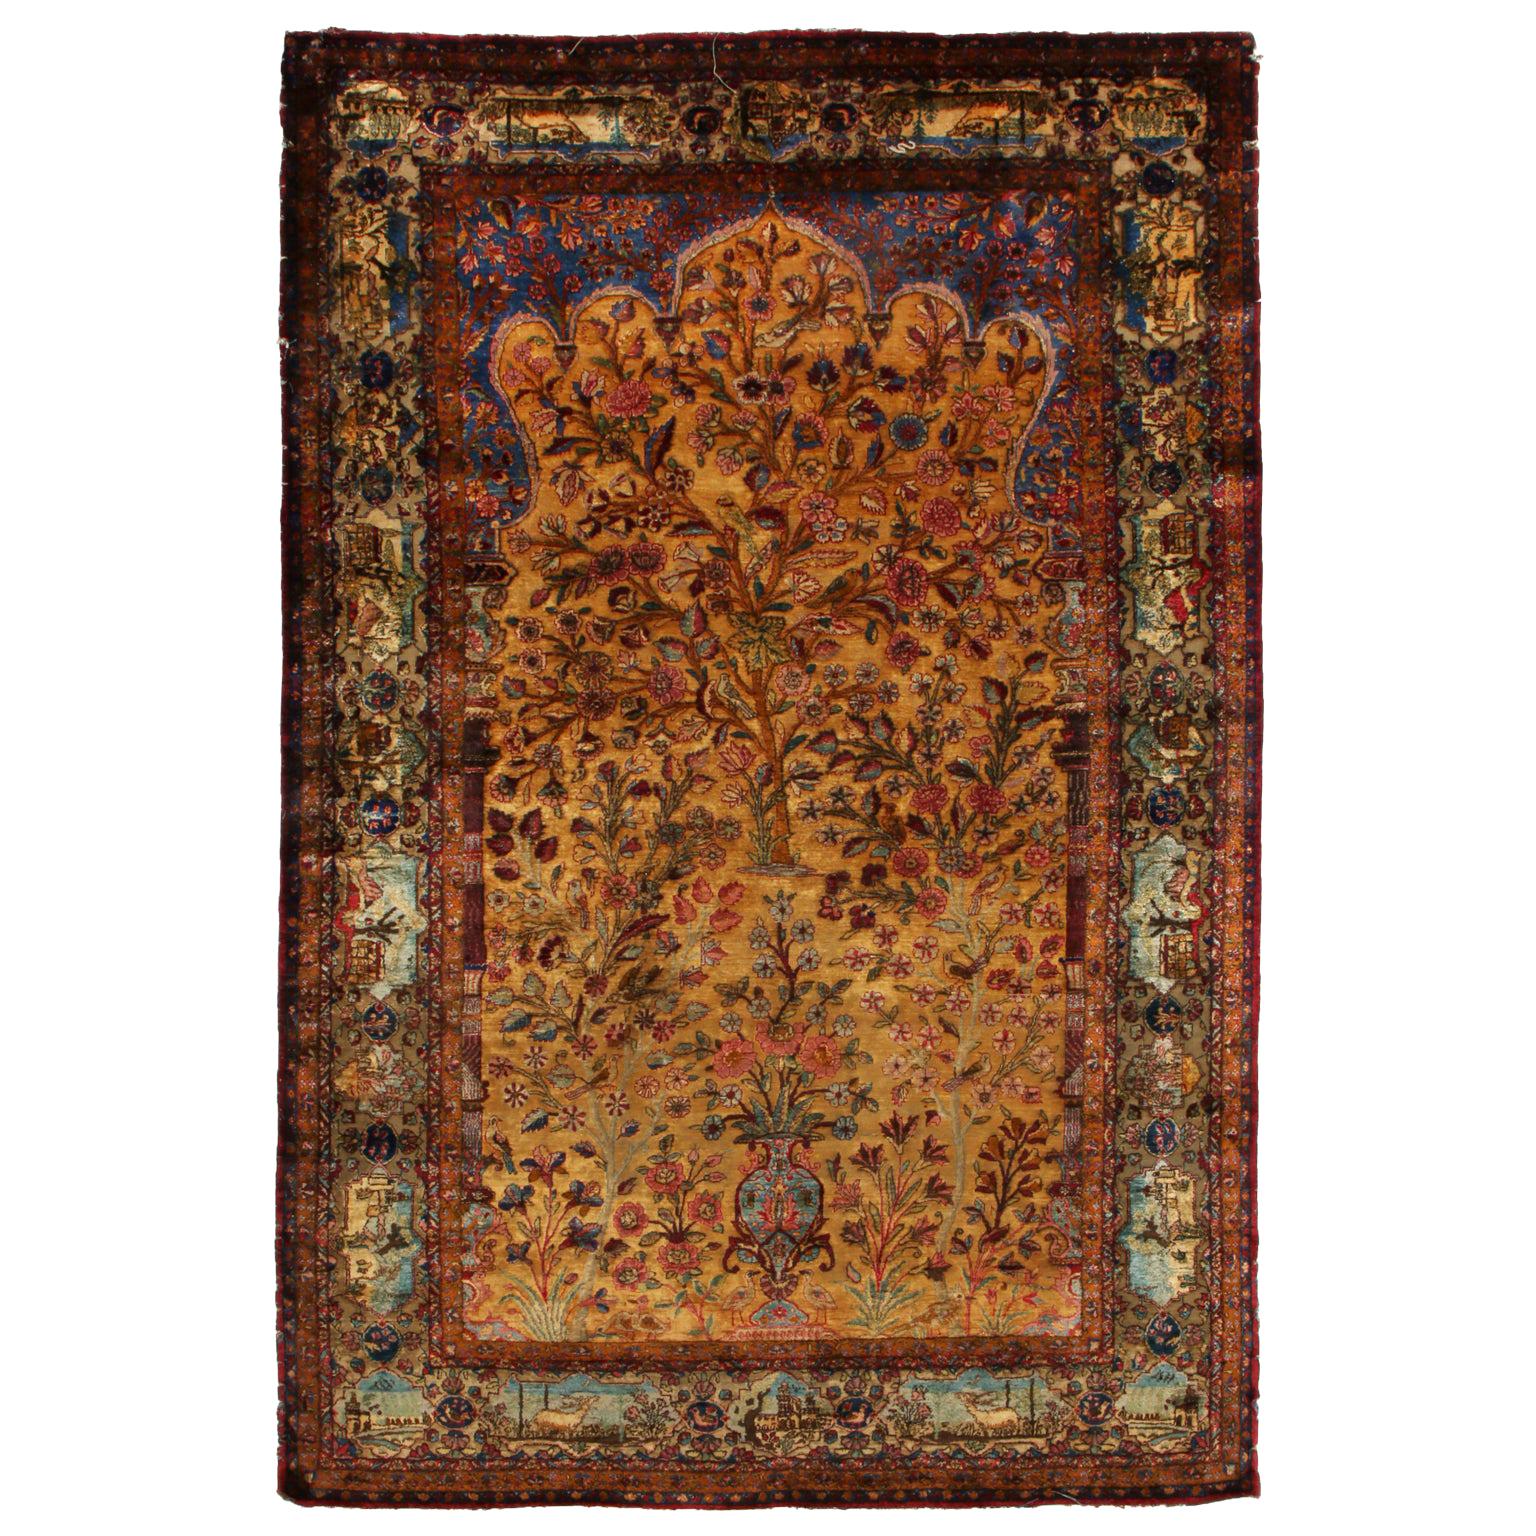 Kashan Golden-Brown and Blue Silk Persian Rug with Unique Floral Medallion